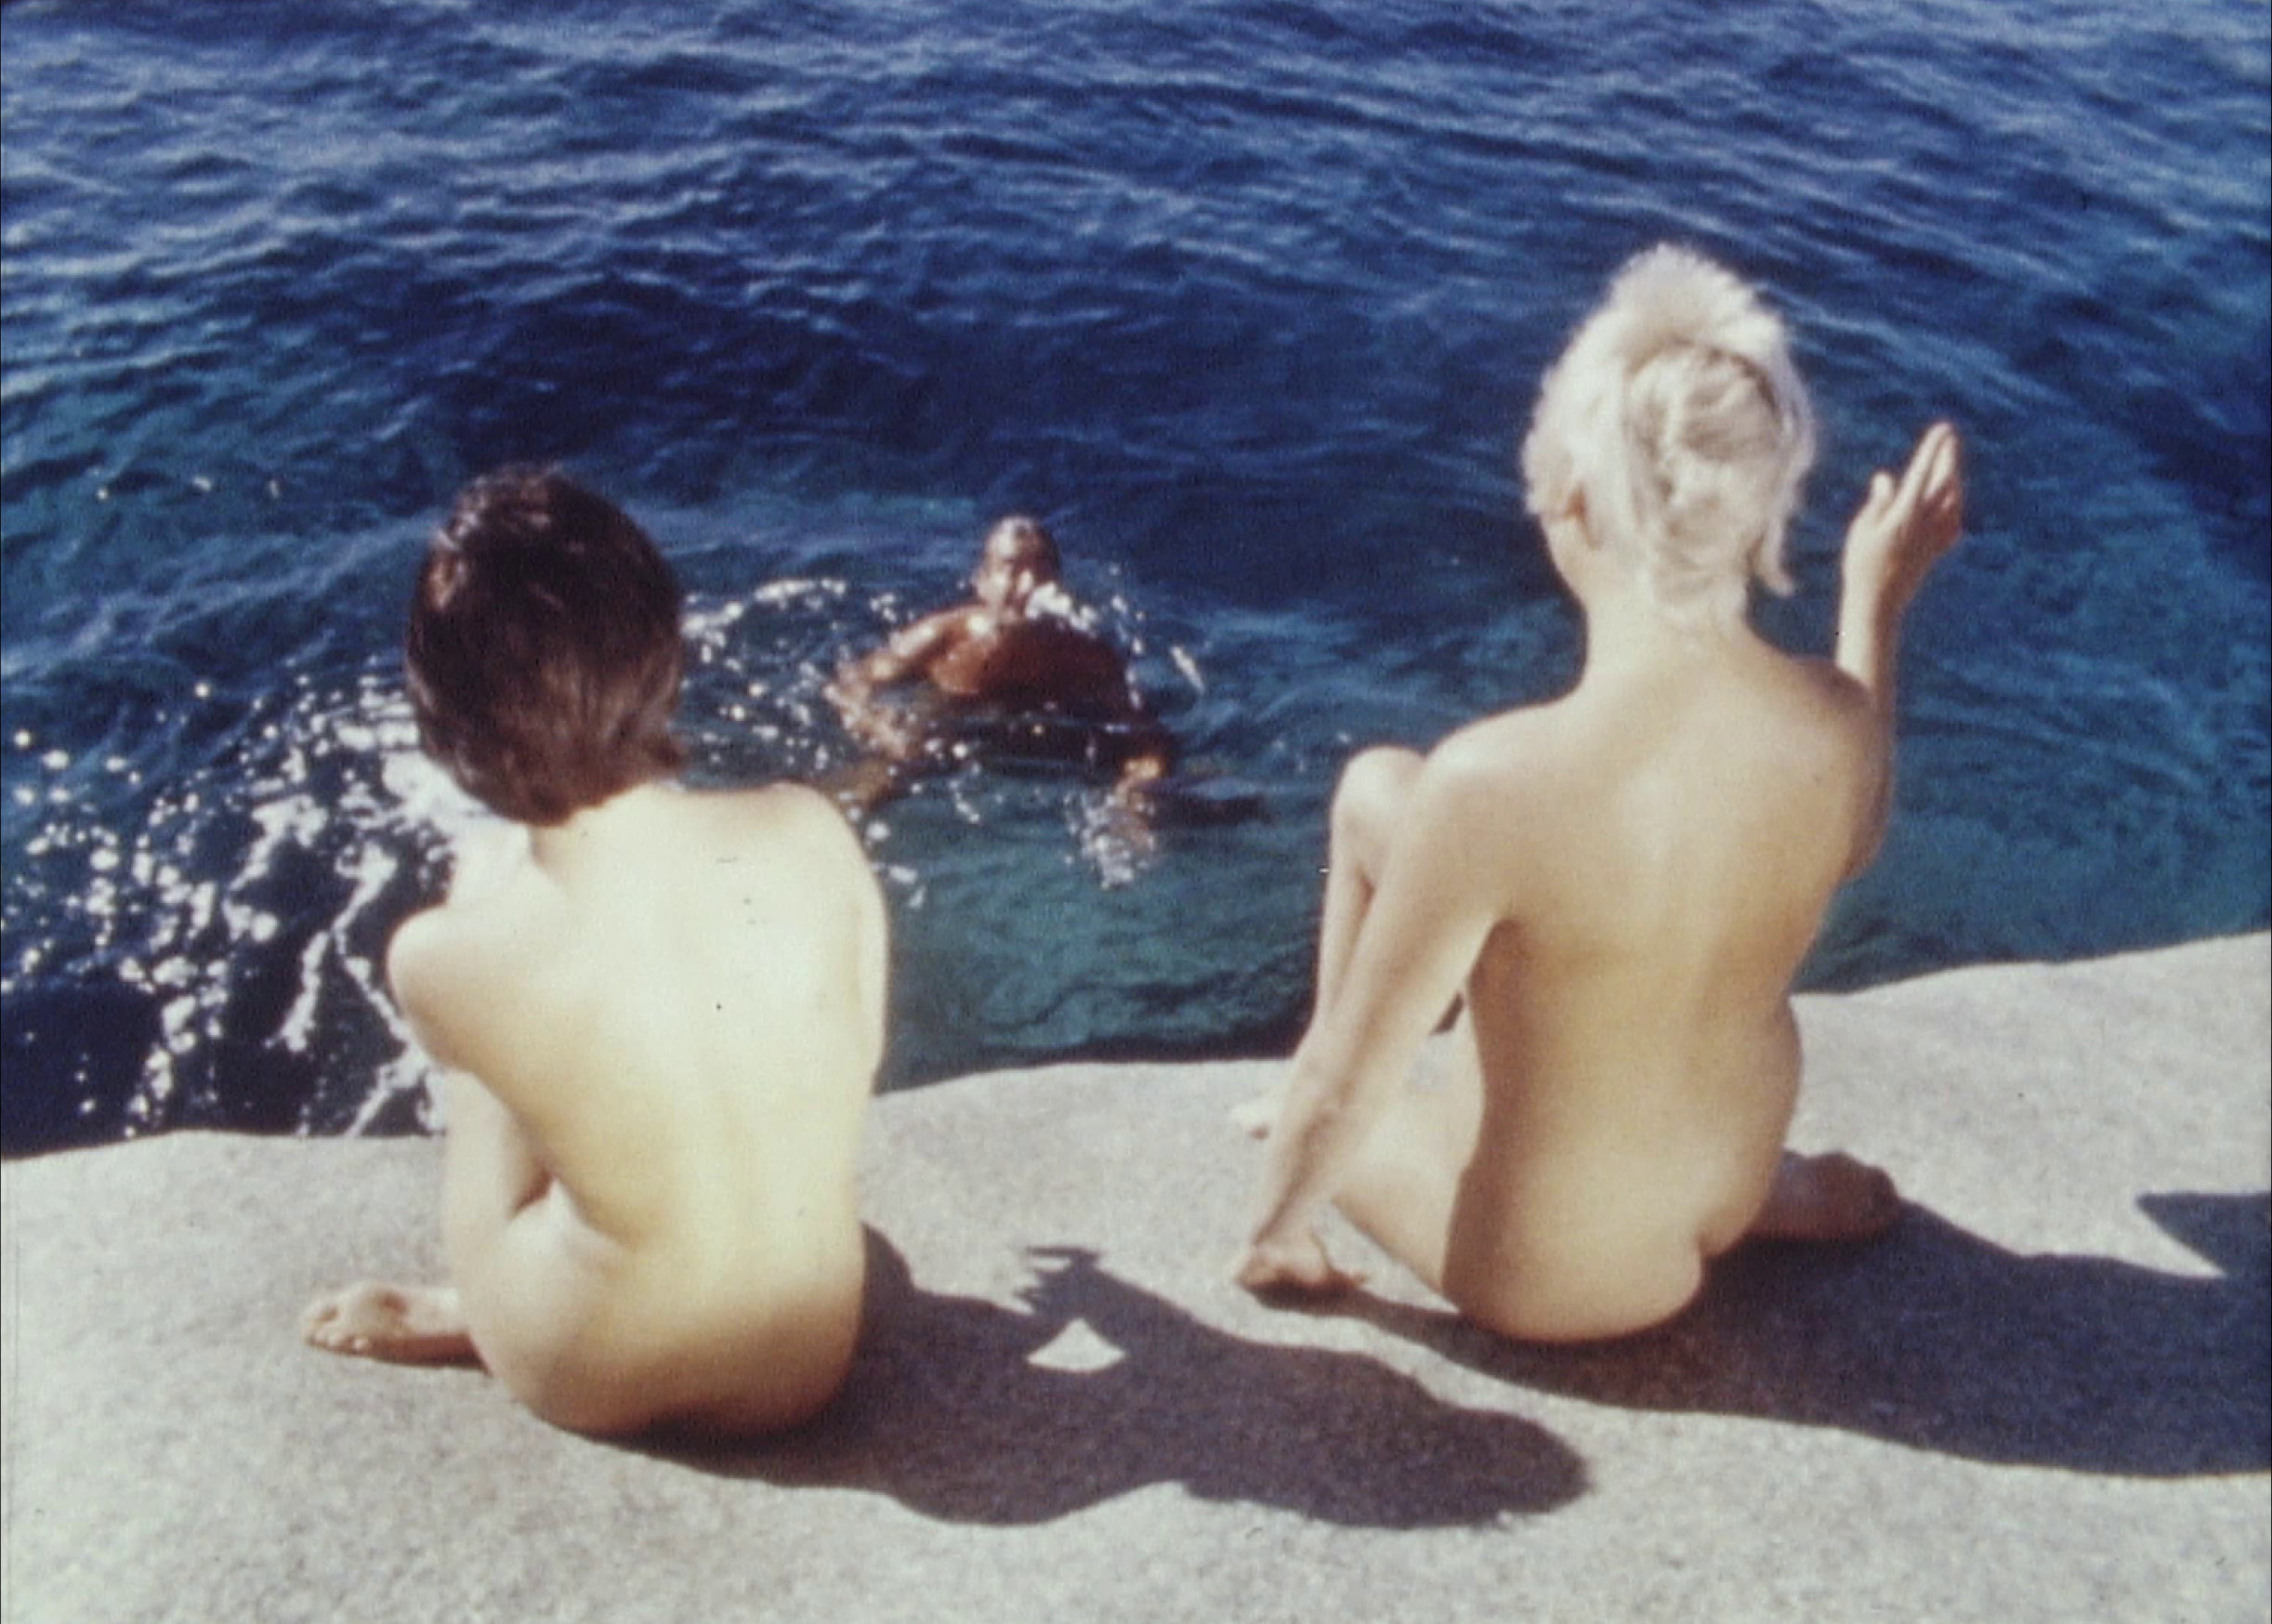 Sun-drenched nudist films from the 50s and